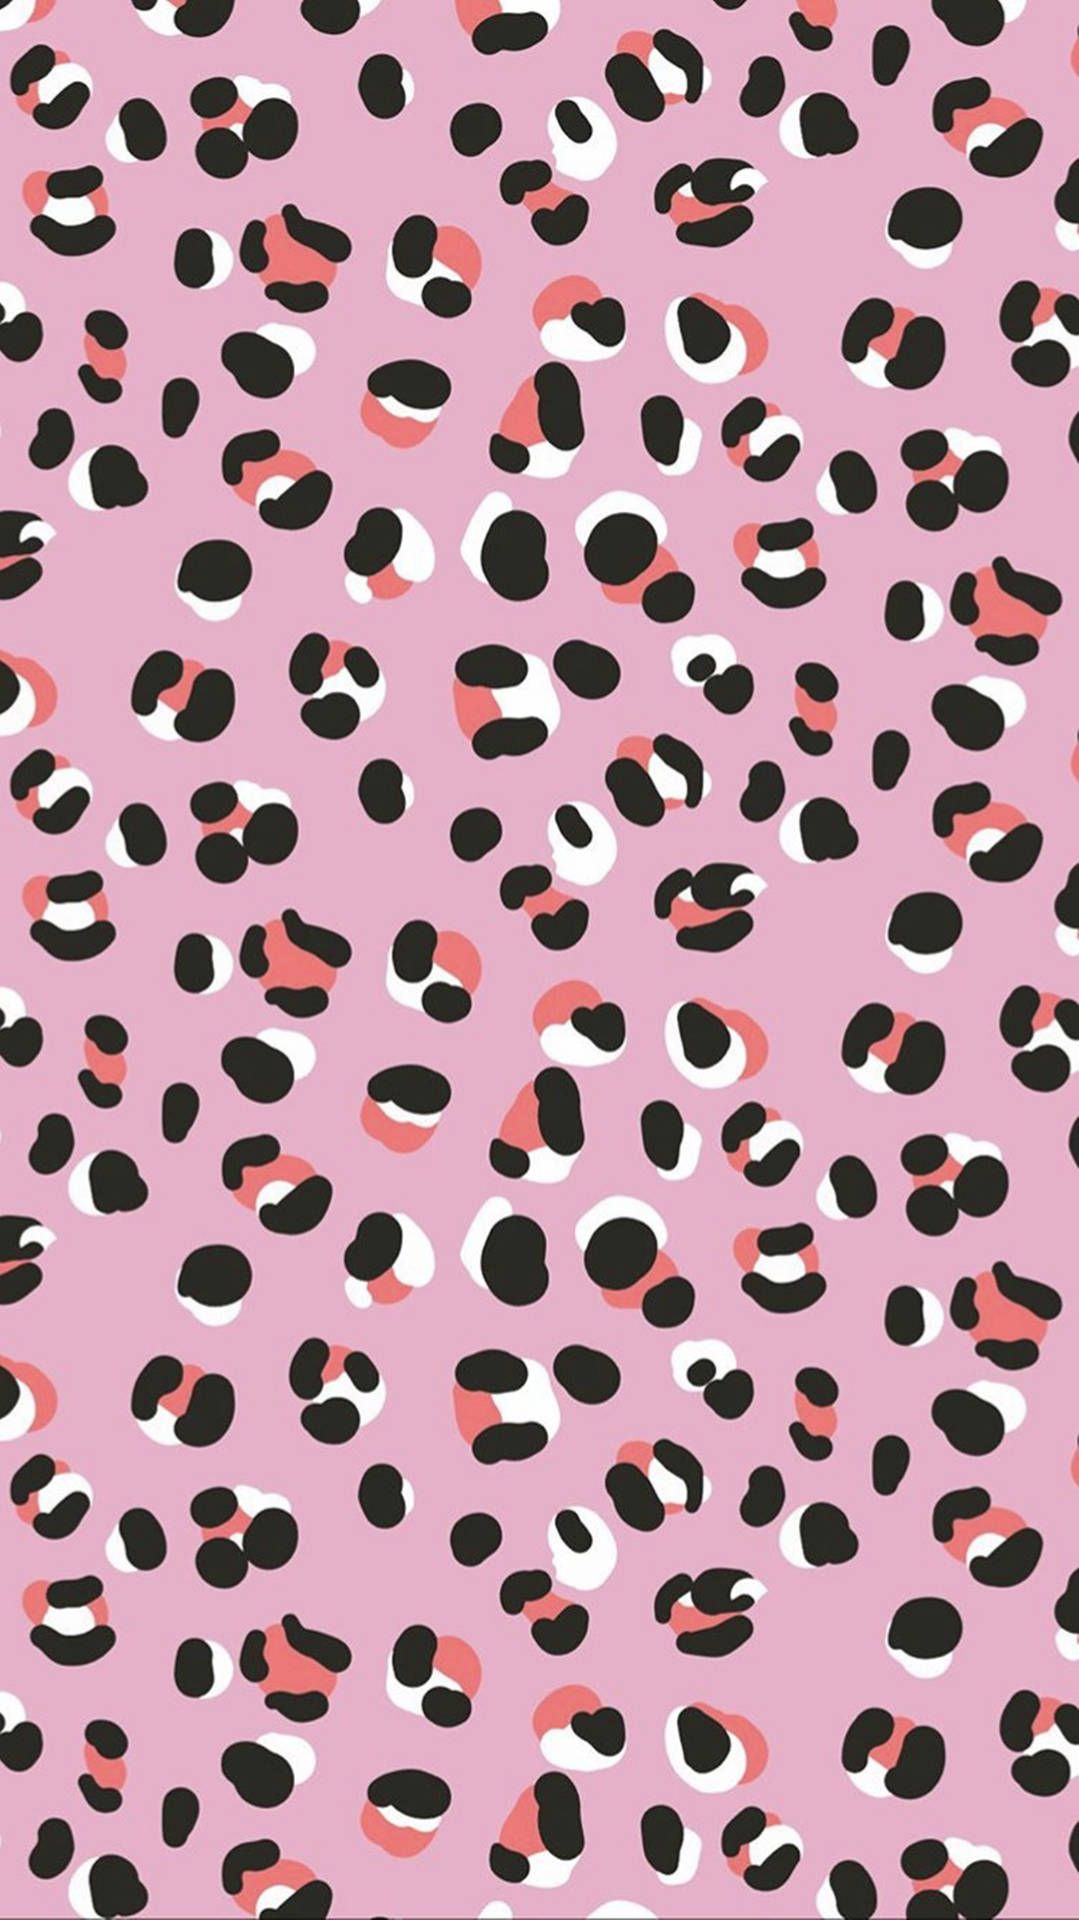 IPhone wallpaper with abstract leopard pattern on pink background - VSCO